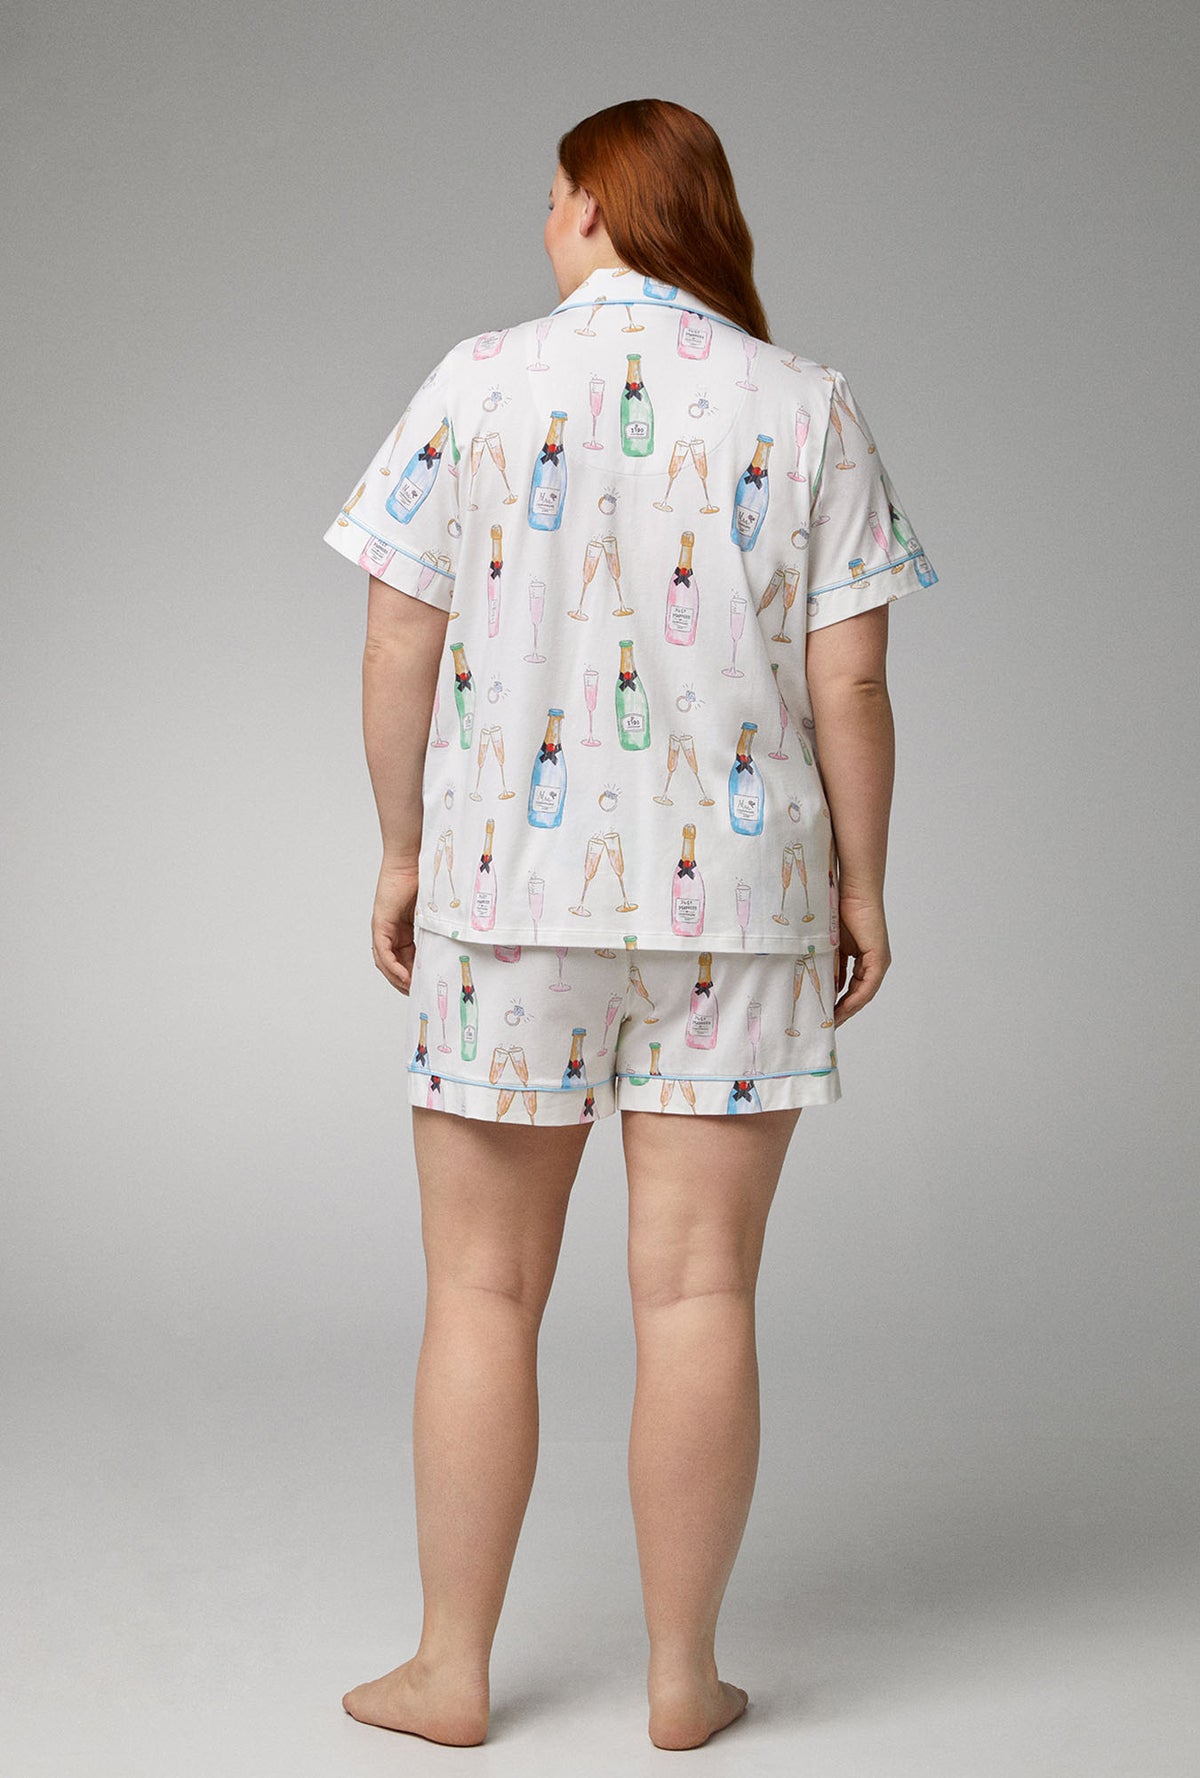 A lady wearing Short Sleeve Classic Shorty Stretch Jersey plus size  PJ Set with Champagne Wedding print